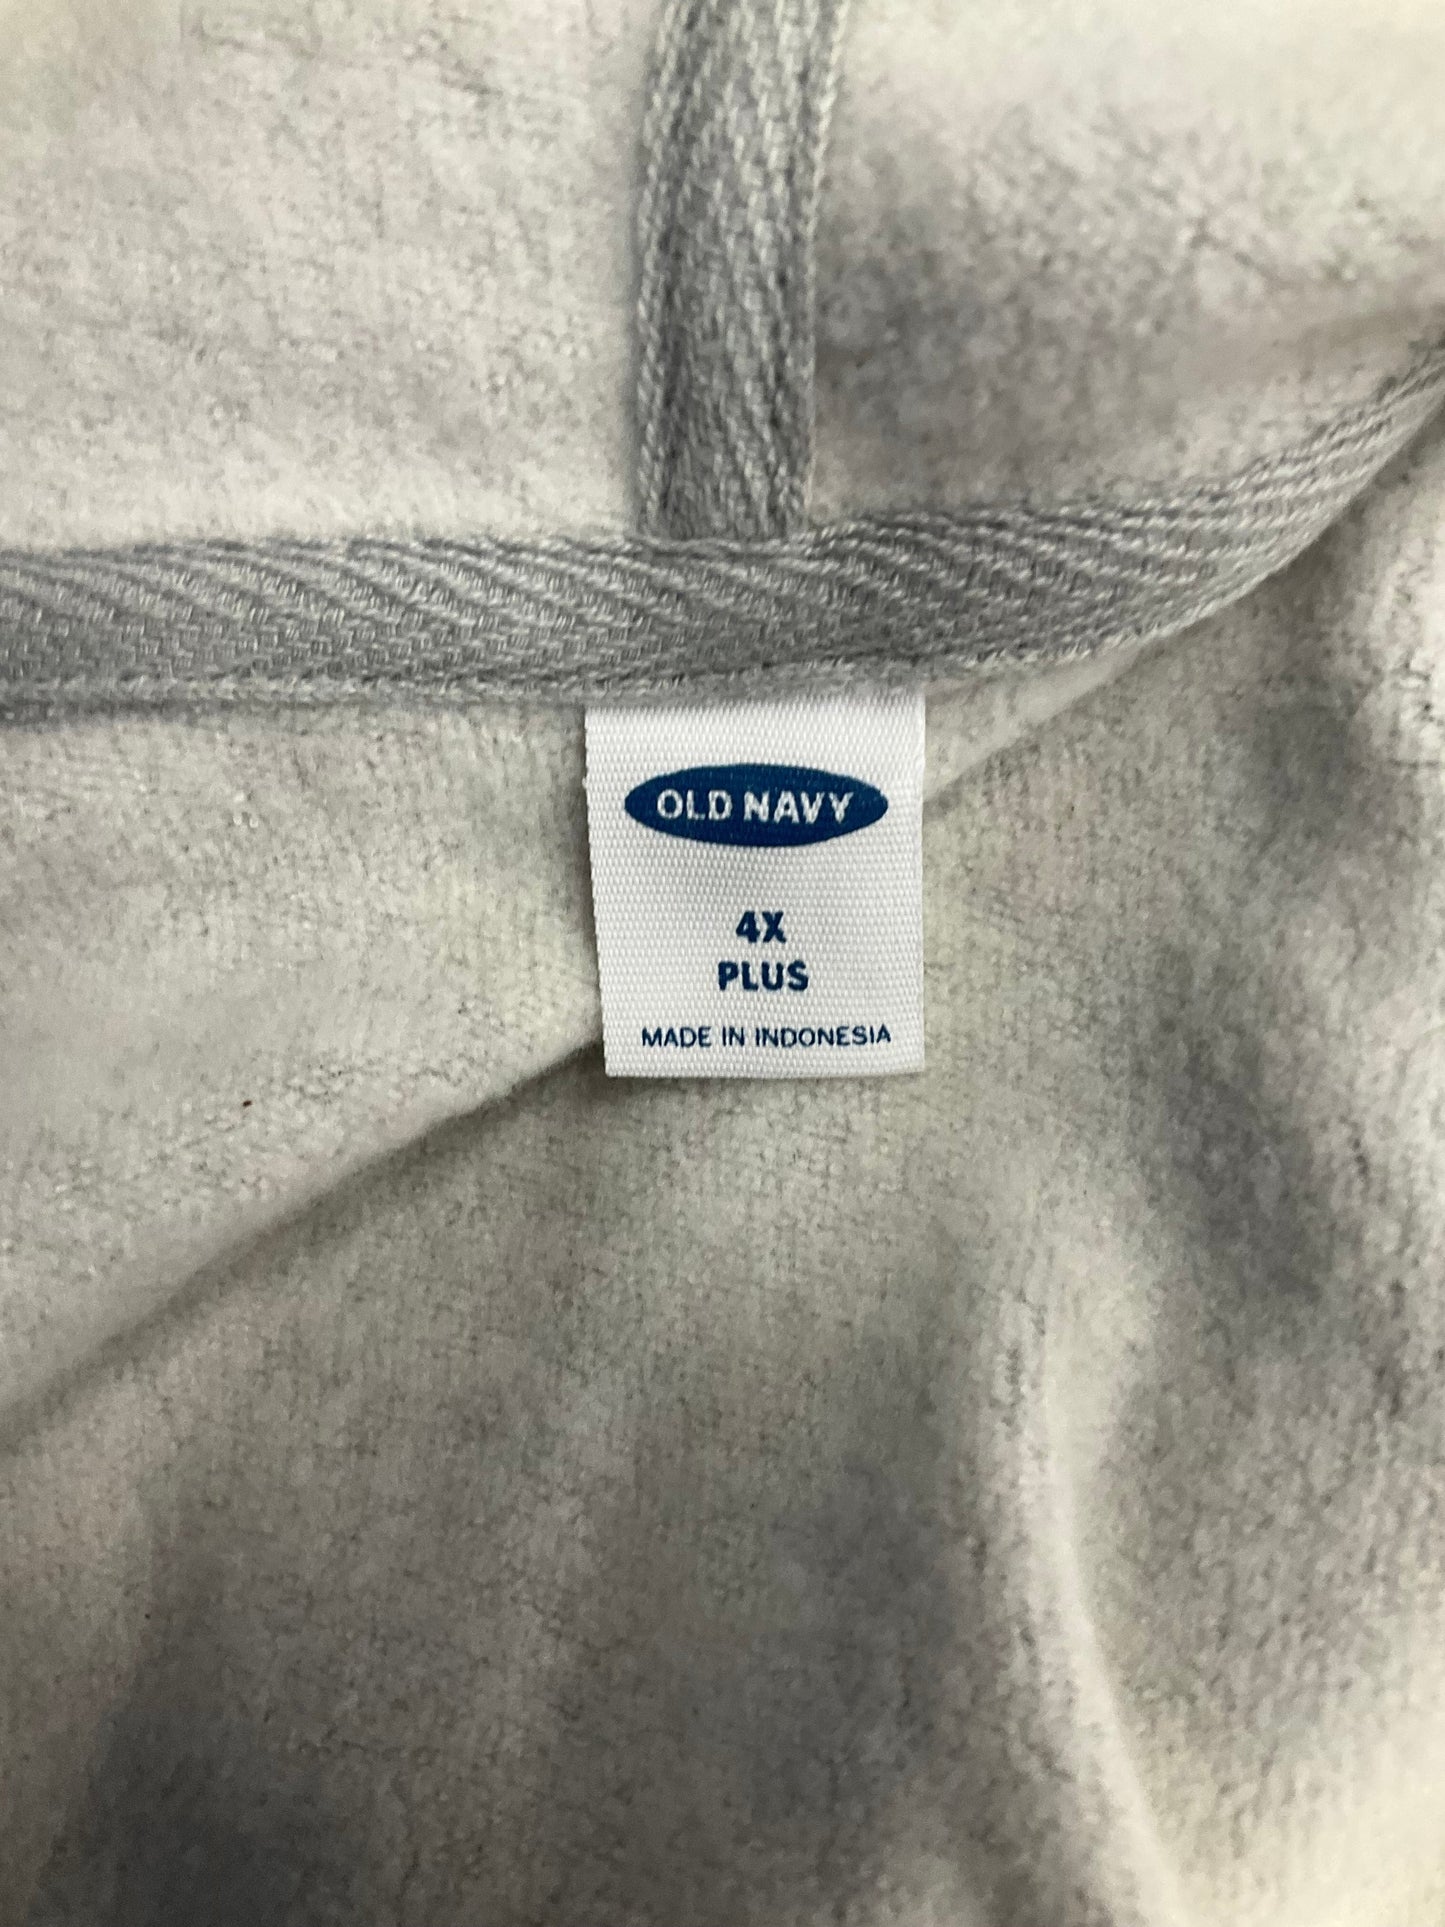 Grey Jacket Other Old Navy, Size 4x